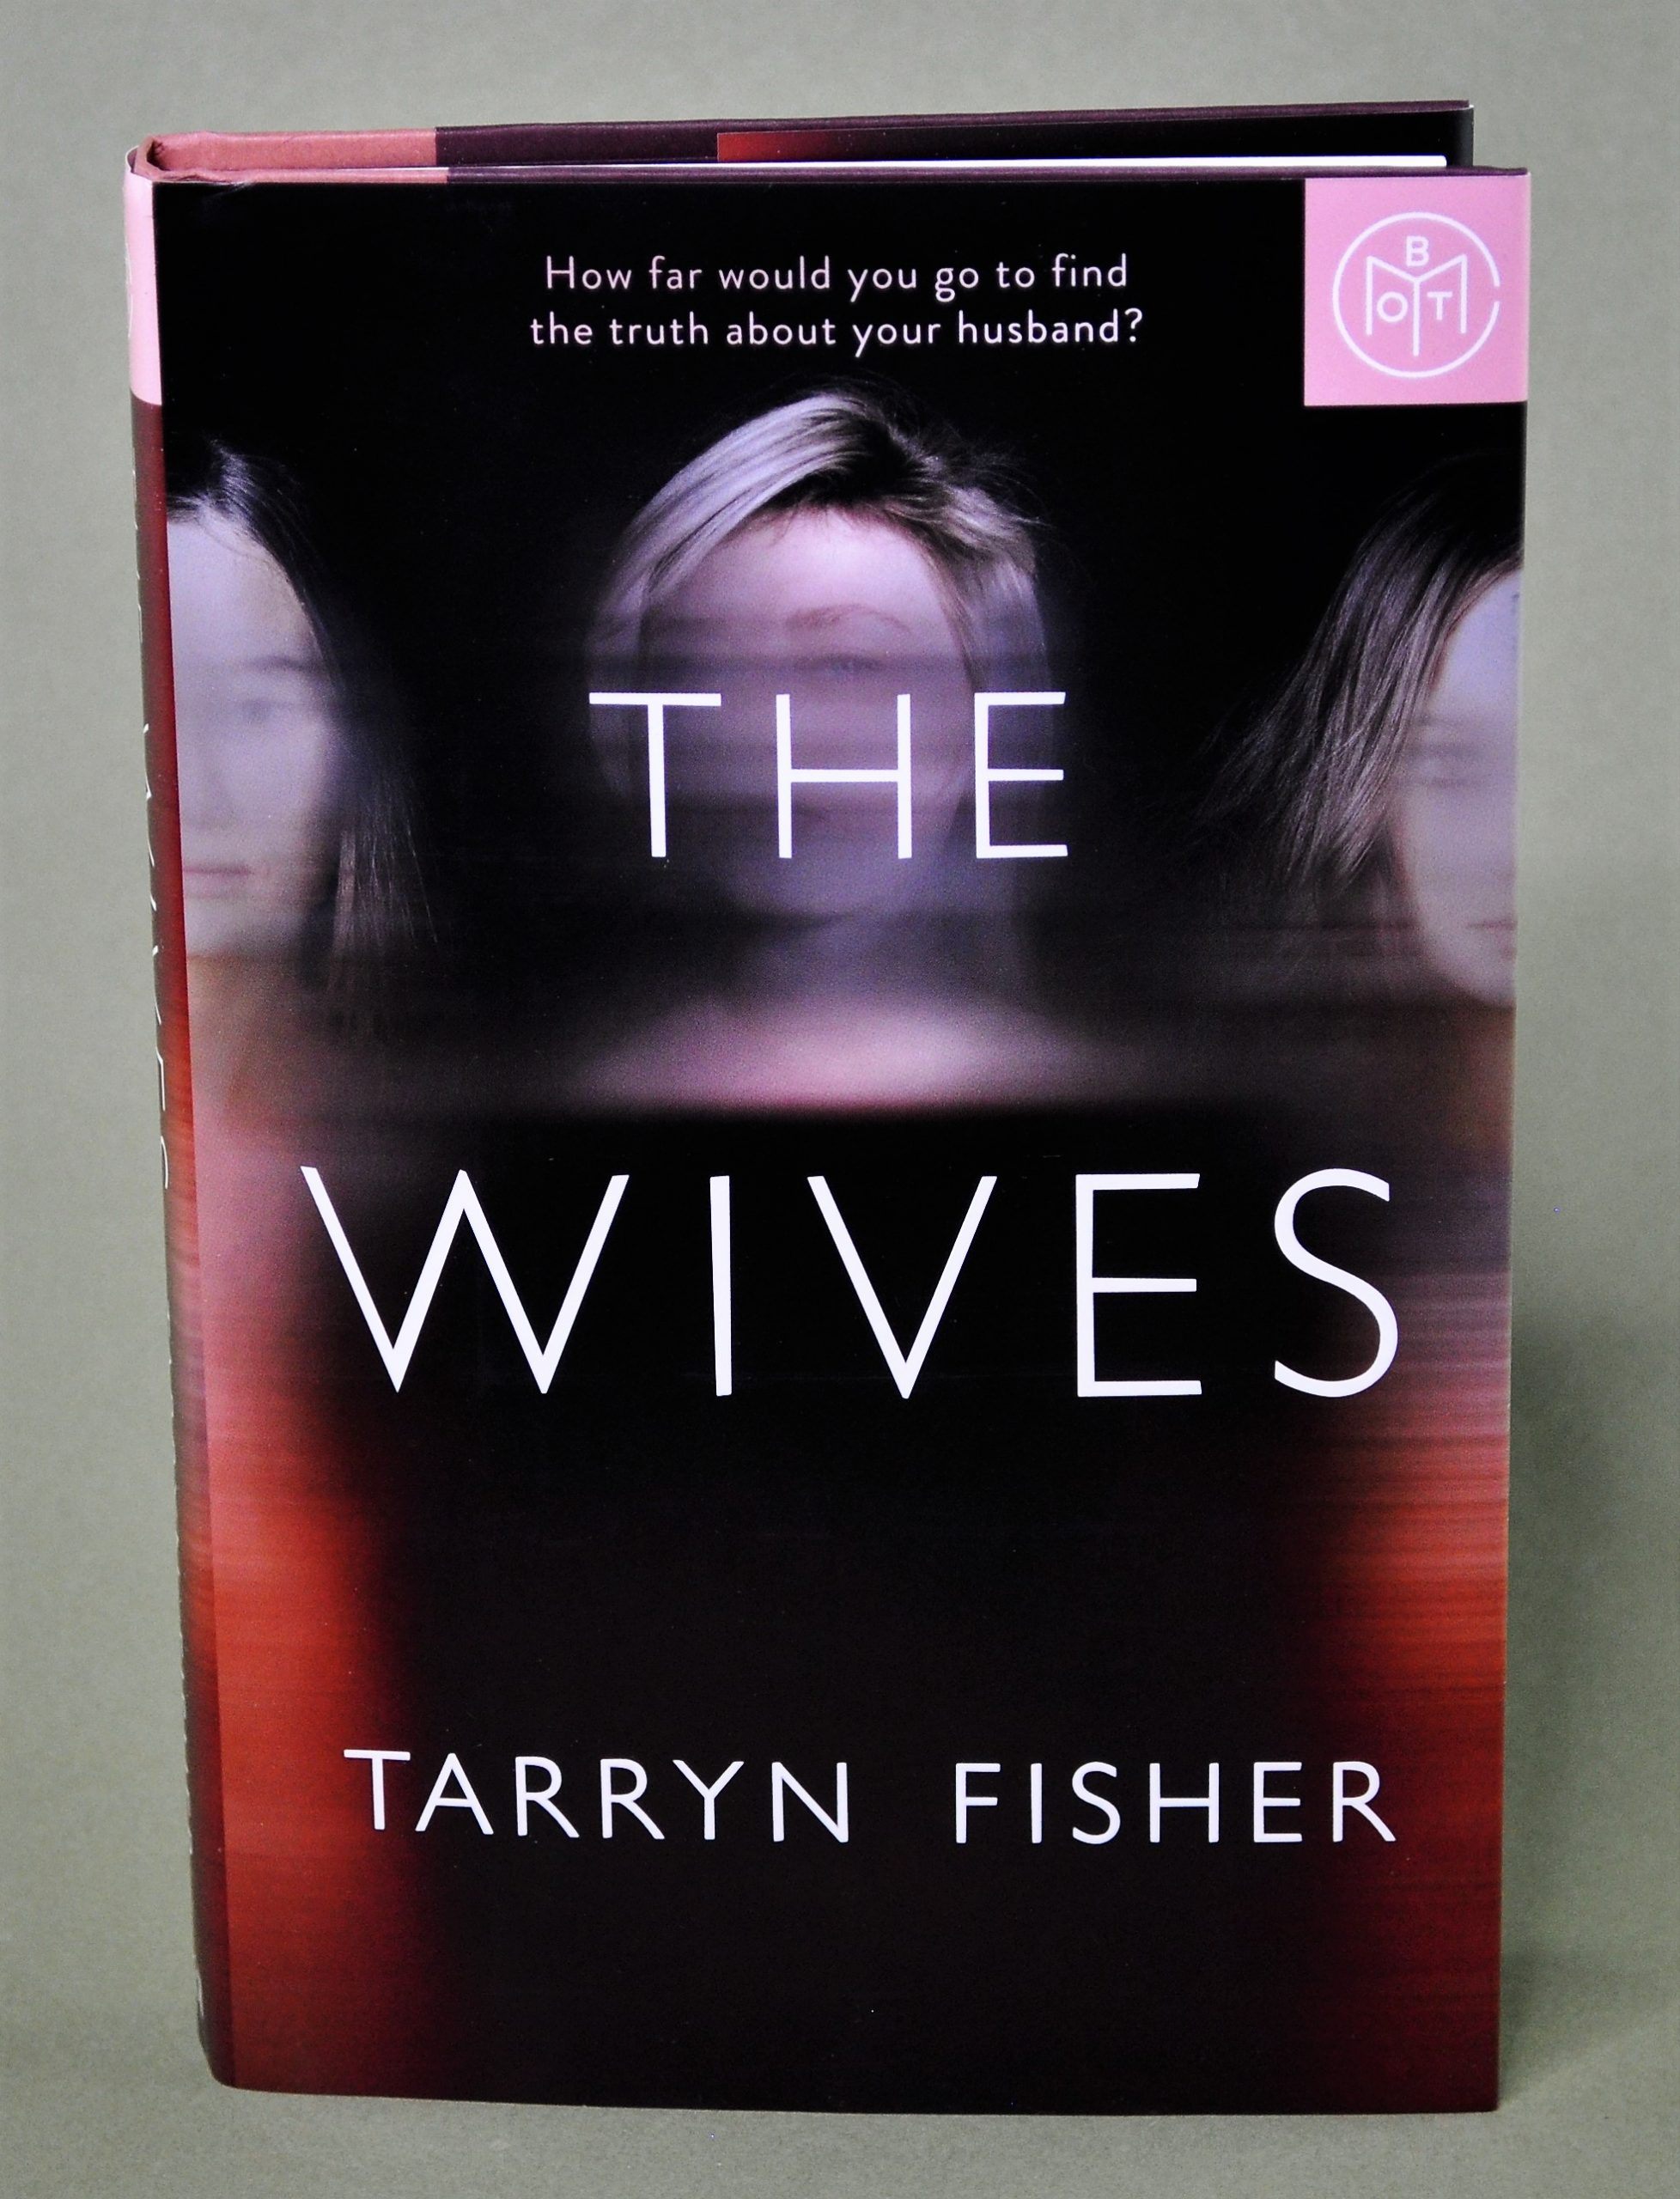 Book of the Month, BOTM, Book of the Month Review, The Wives, Tarryn Fisher